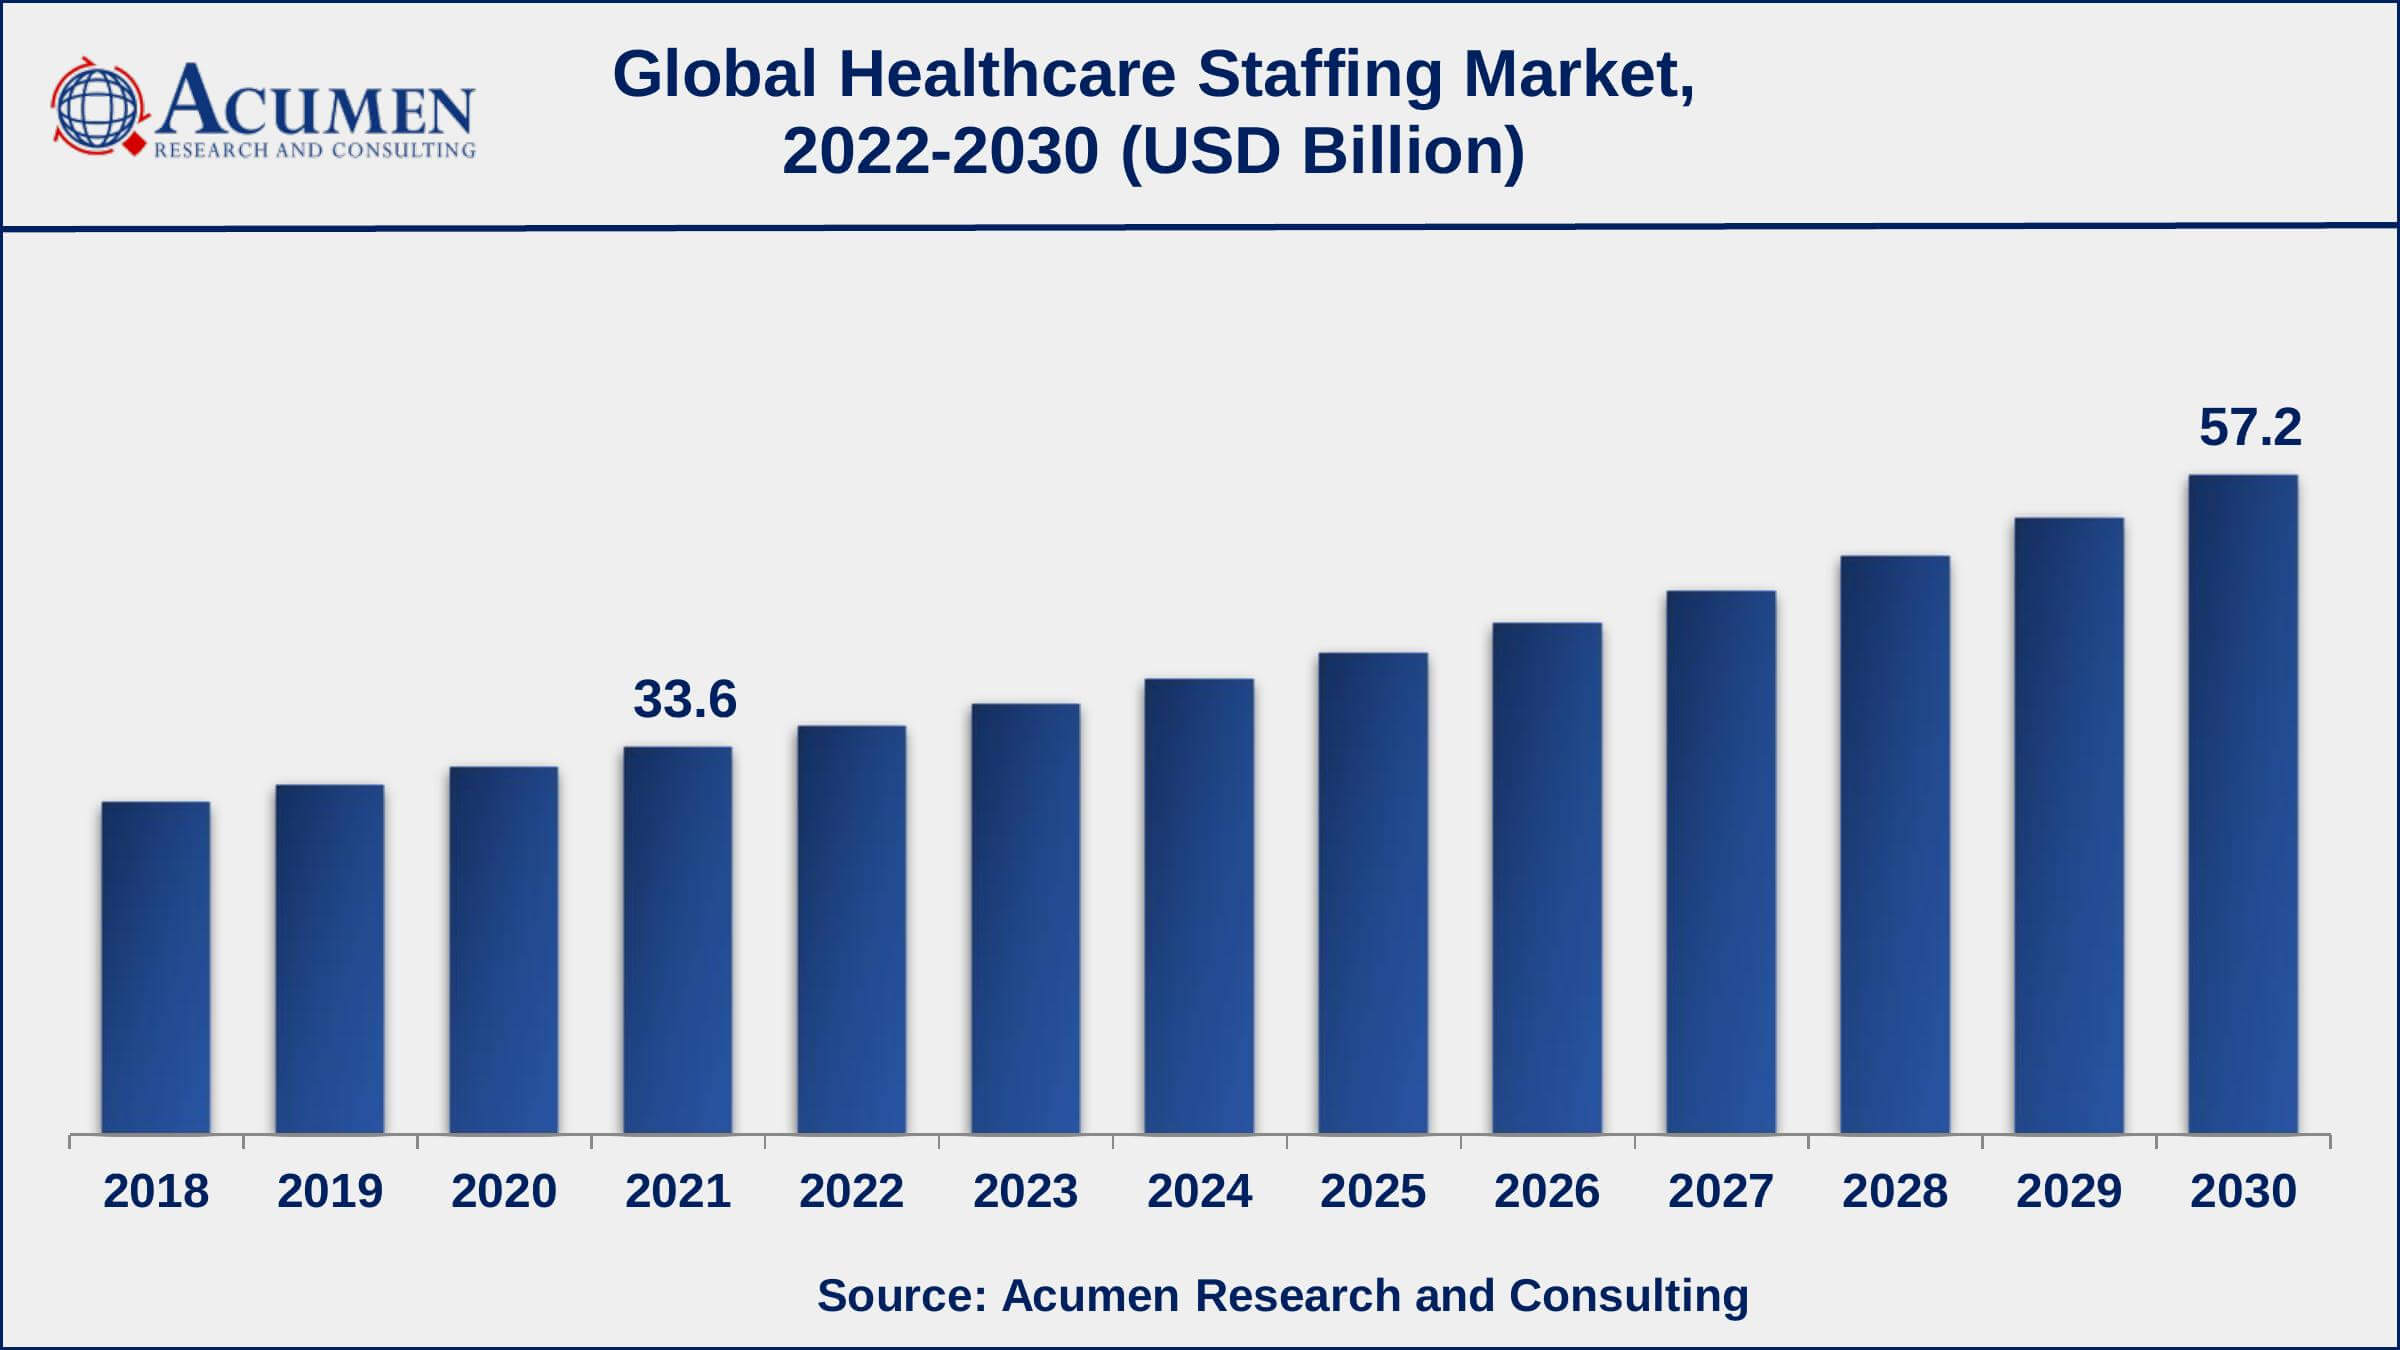 Asia-Pacific healthcare staffing market growth will record noteworthy CAGR from 2022 to 2030